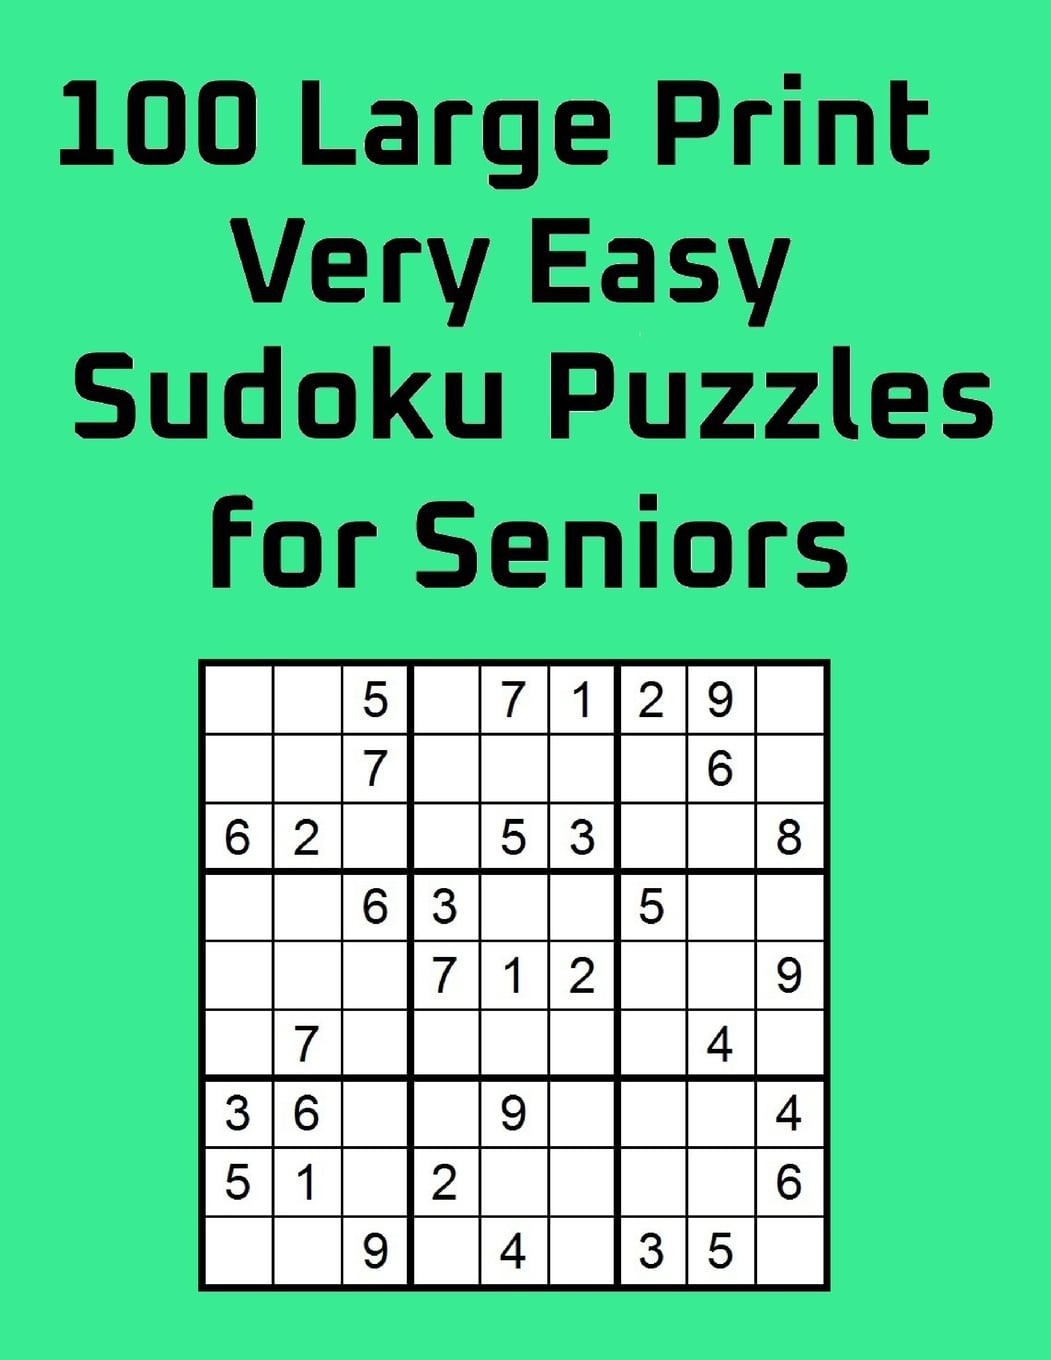 100-large-print-very-easy-sudoku-puzzles-for-seniors-one-large-puzzle